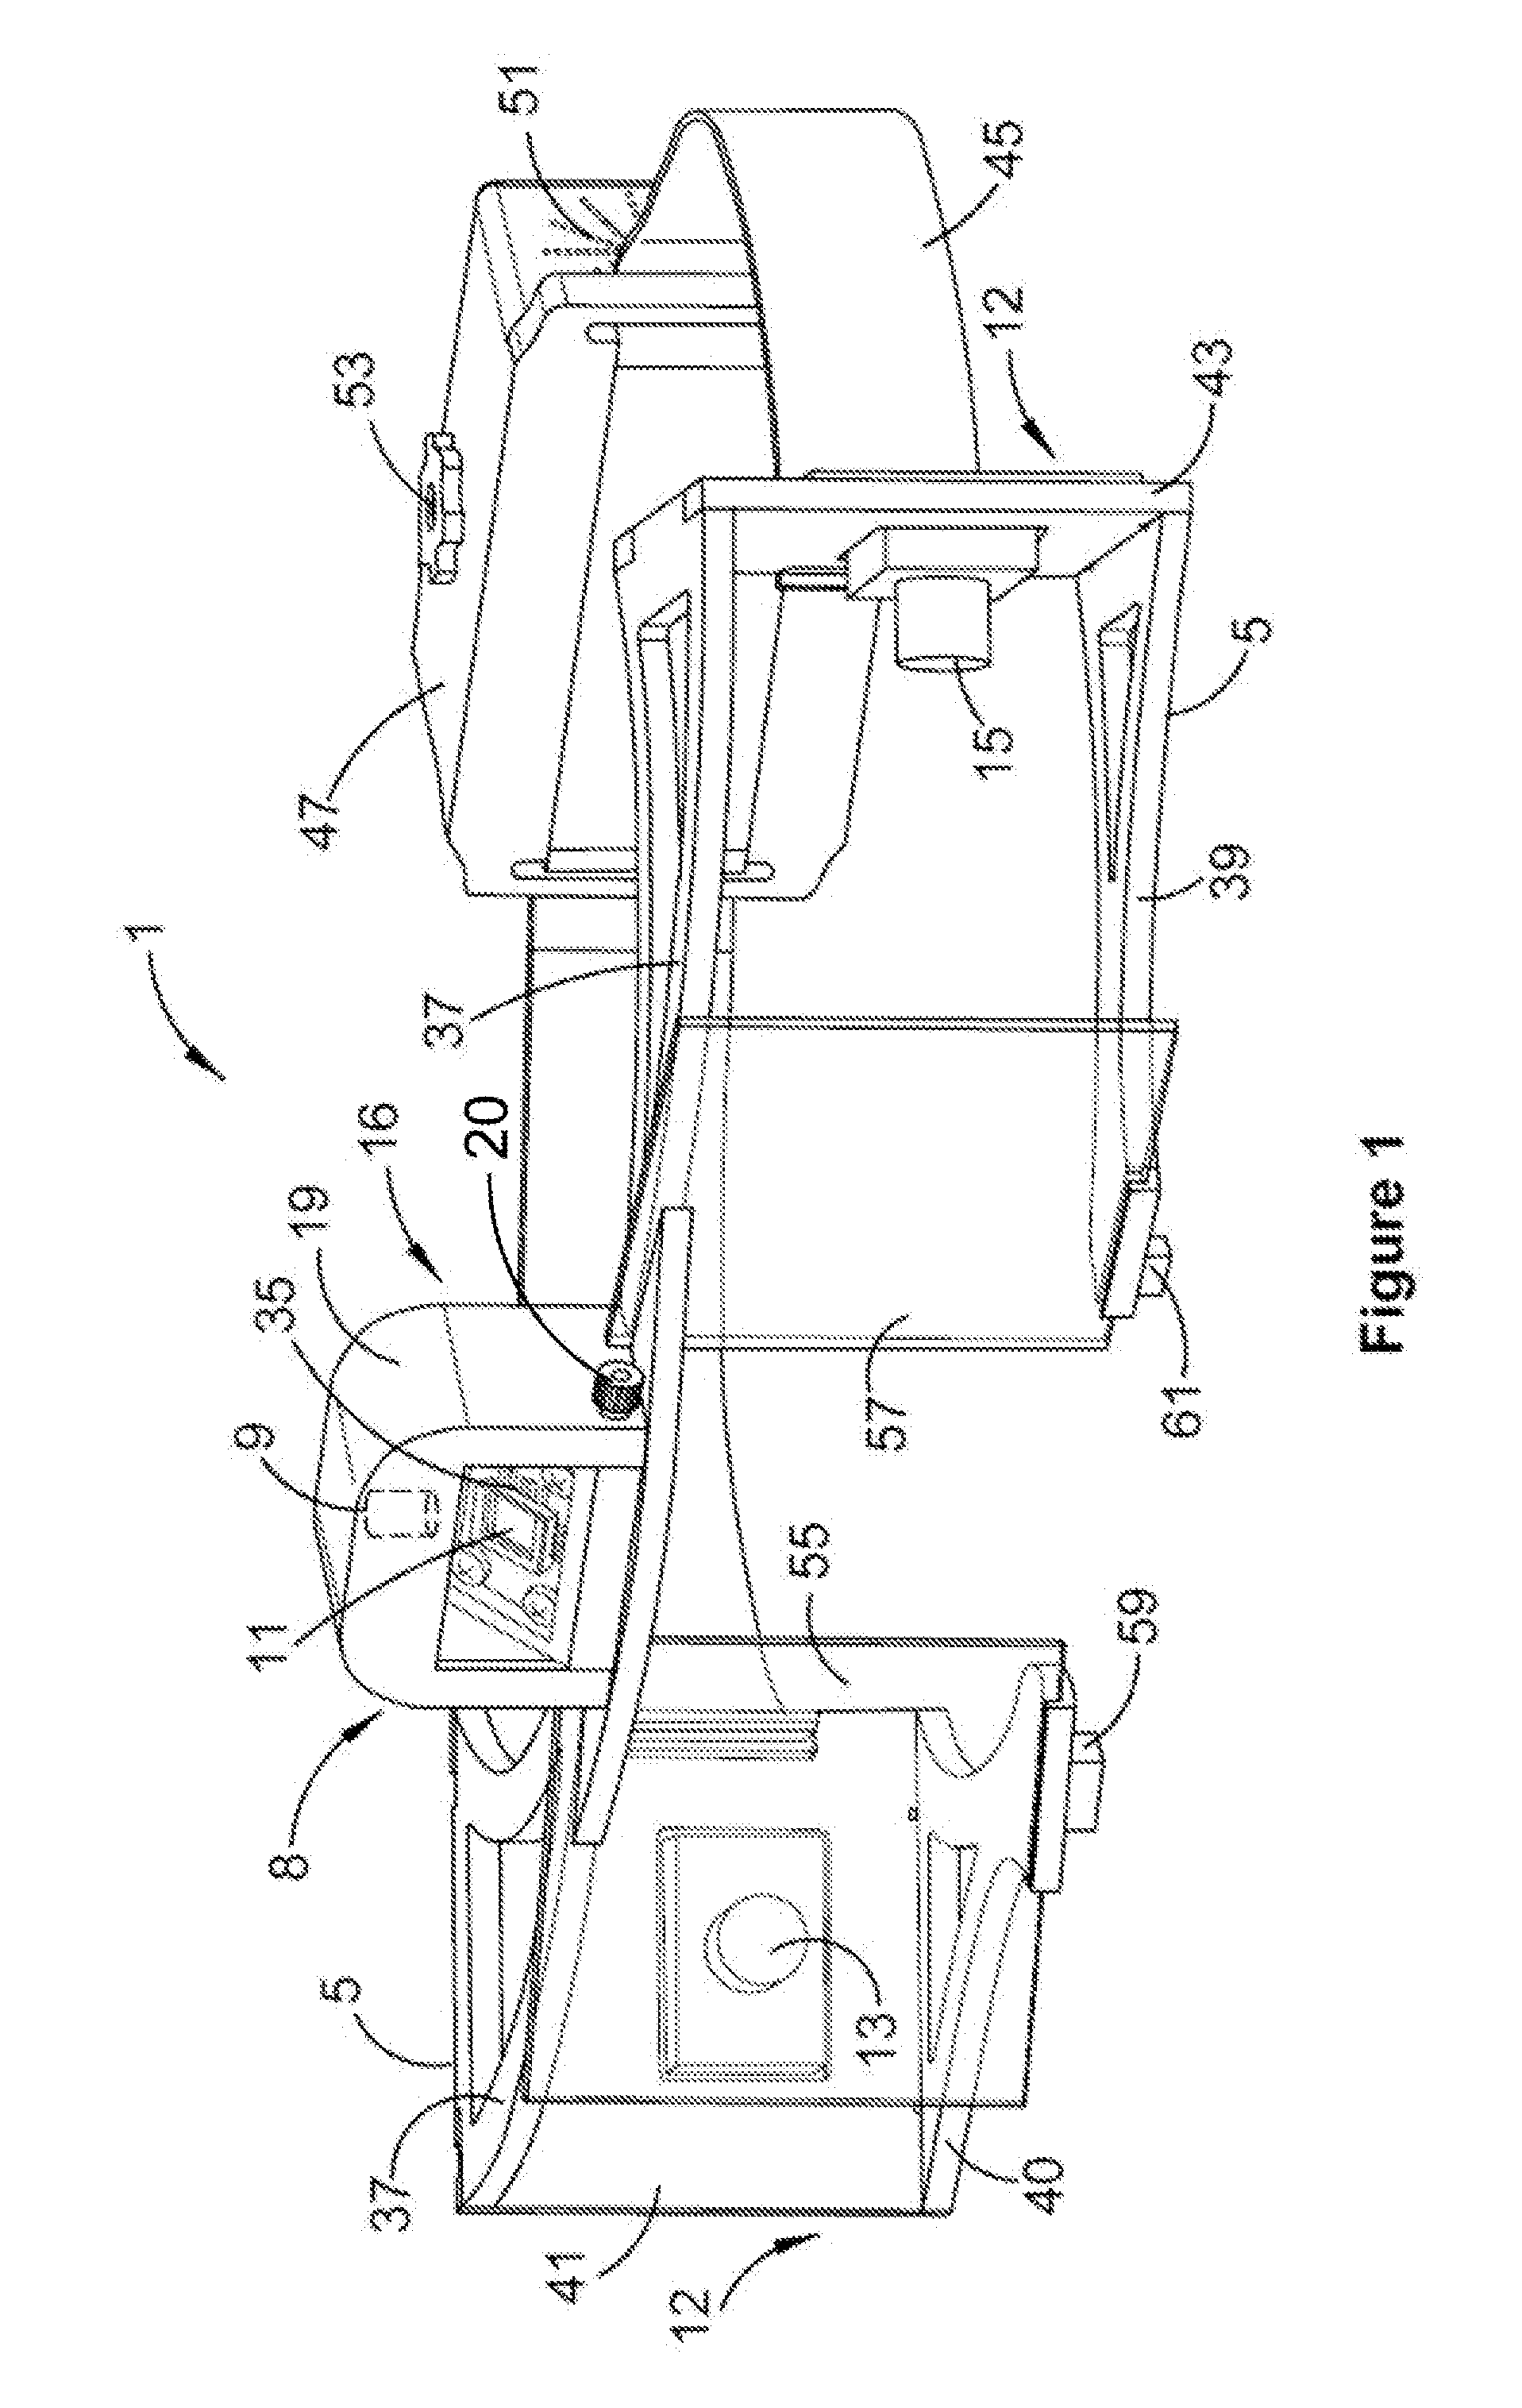 Systems and methods for diagnosis and therapy of vision stability dysfunction